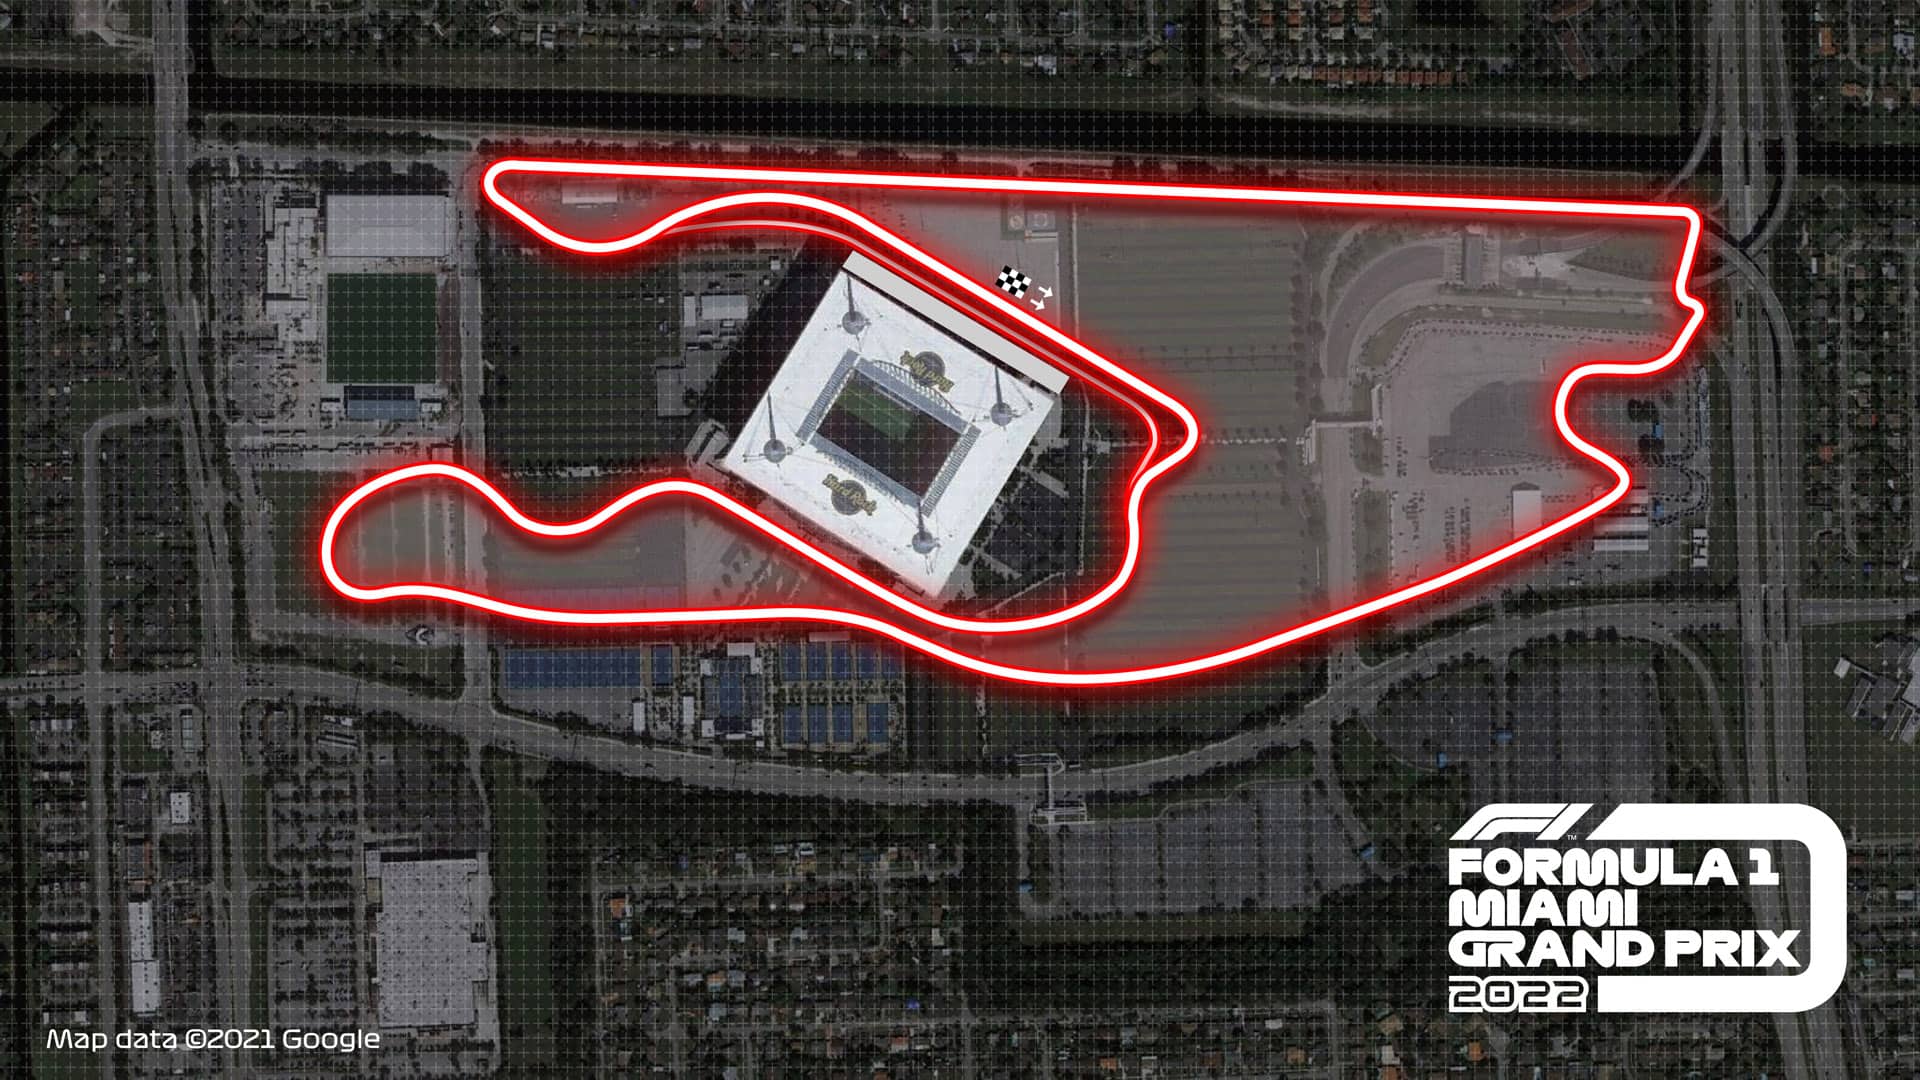 Miami GP Live Streaming When and where to watch Miami GP